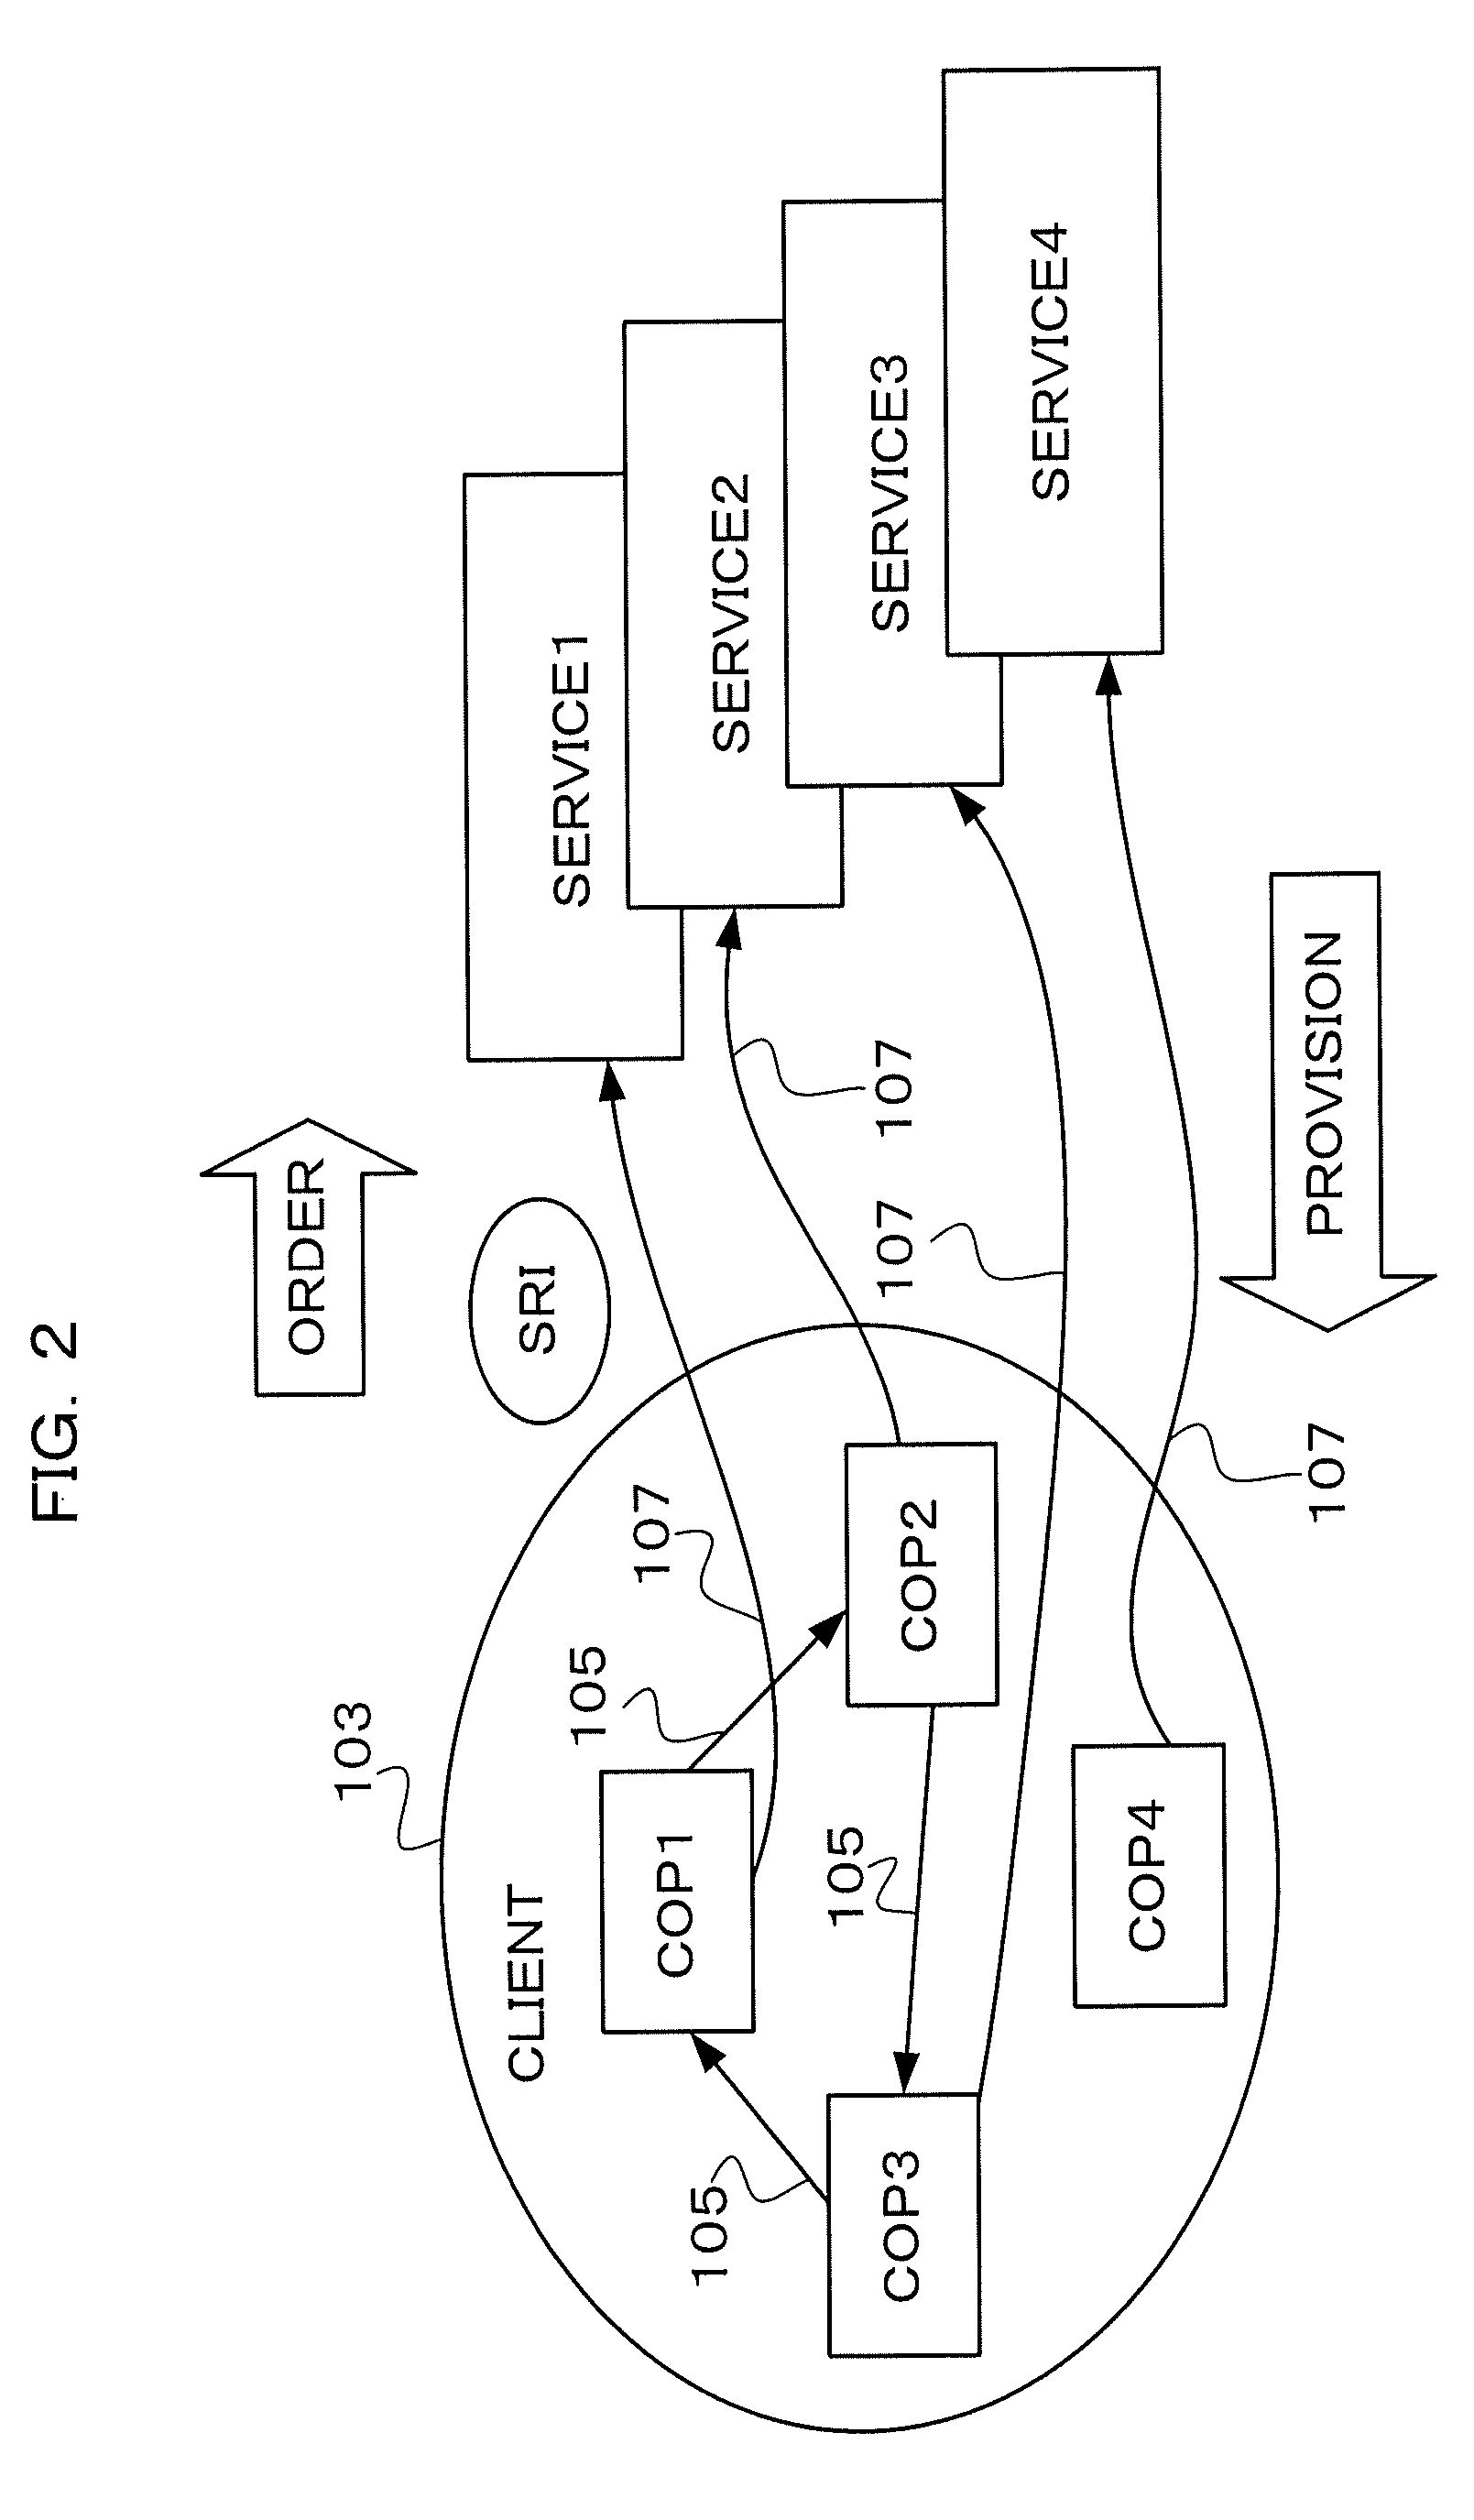 Process management support system and simulation method